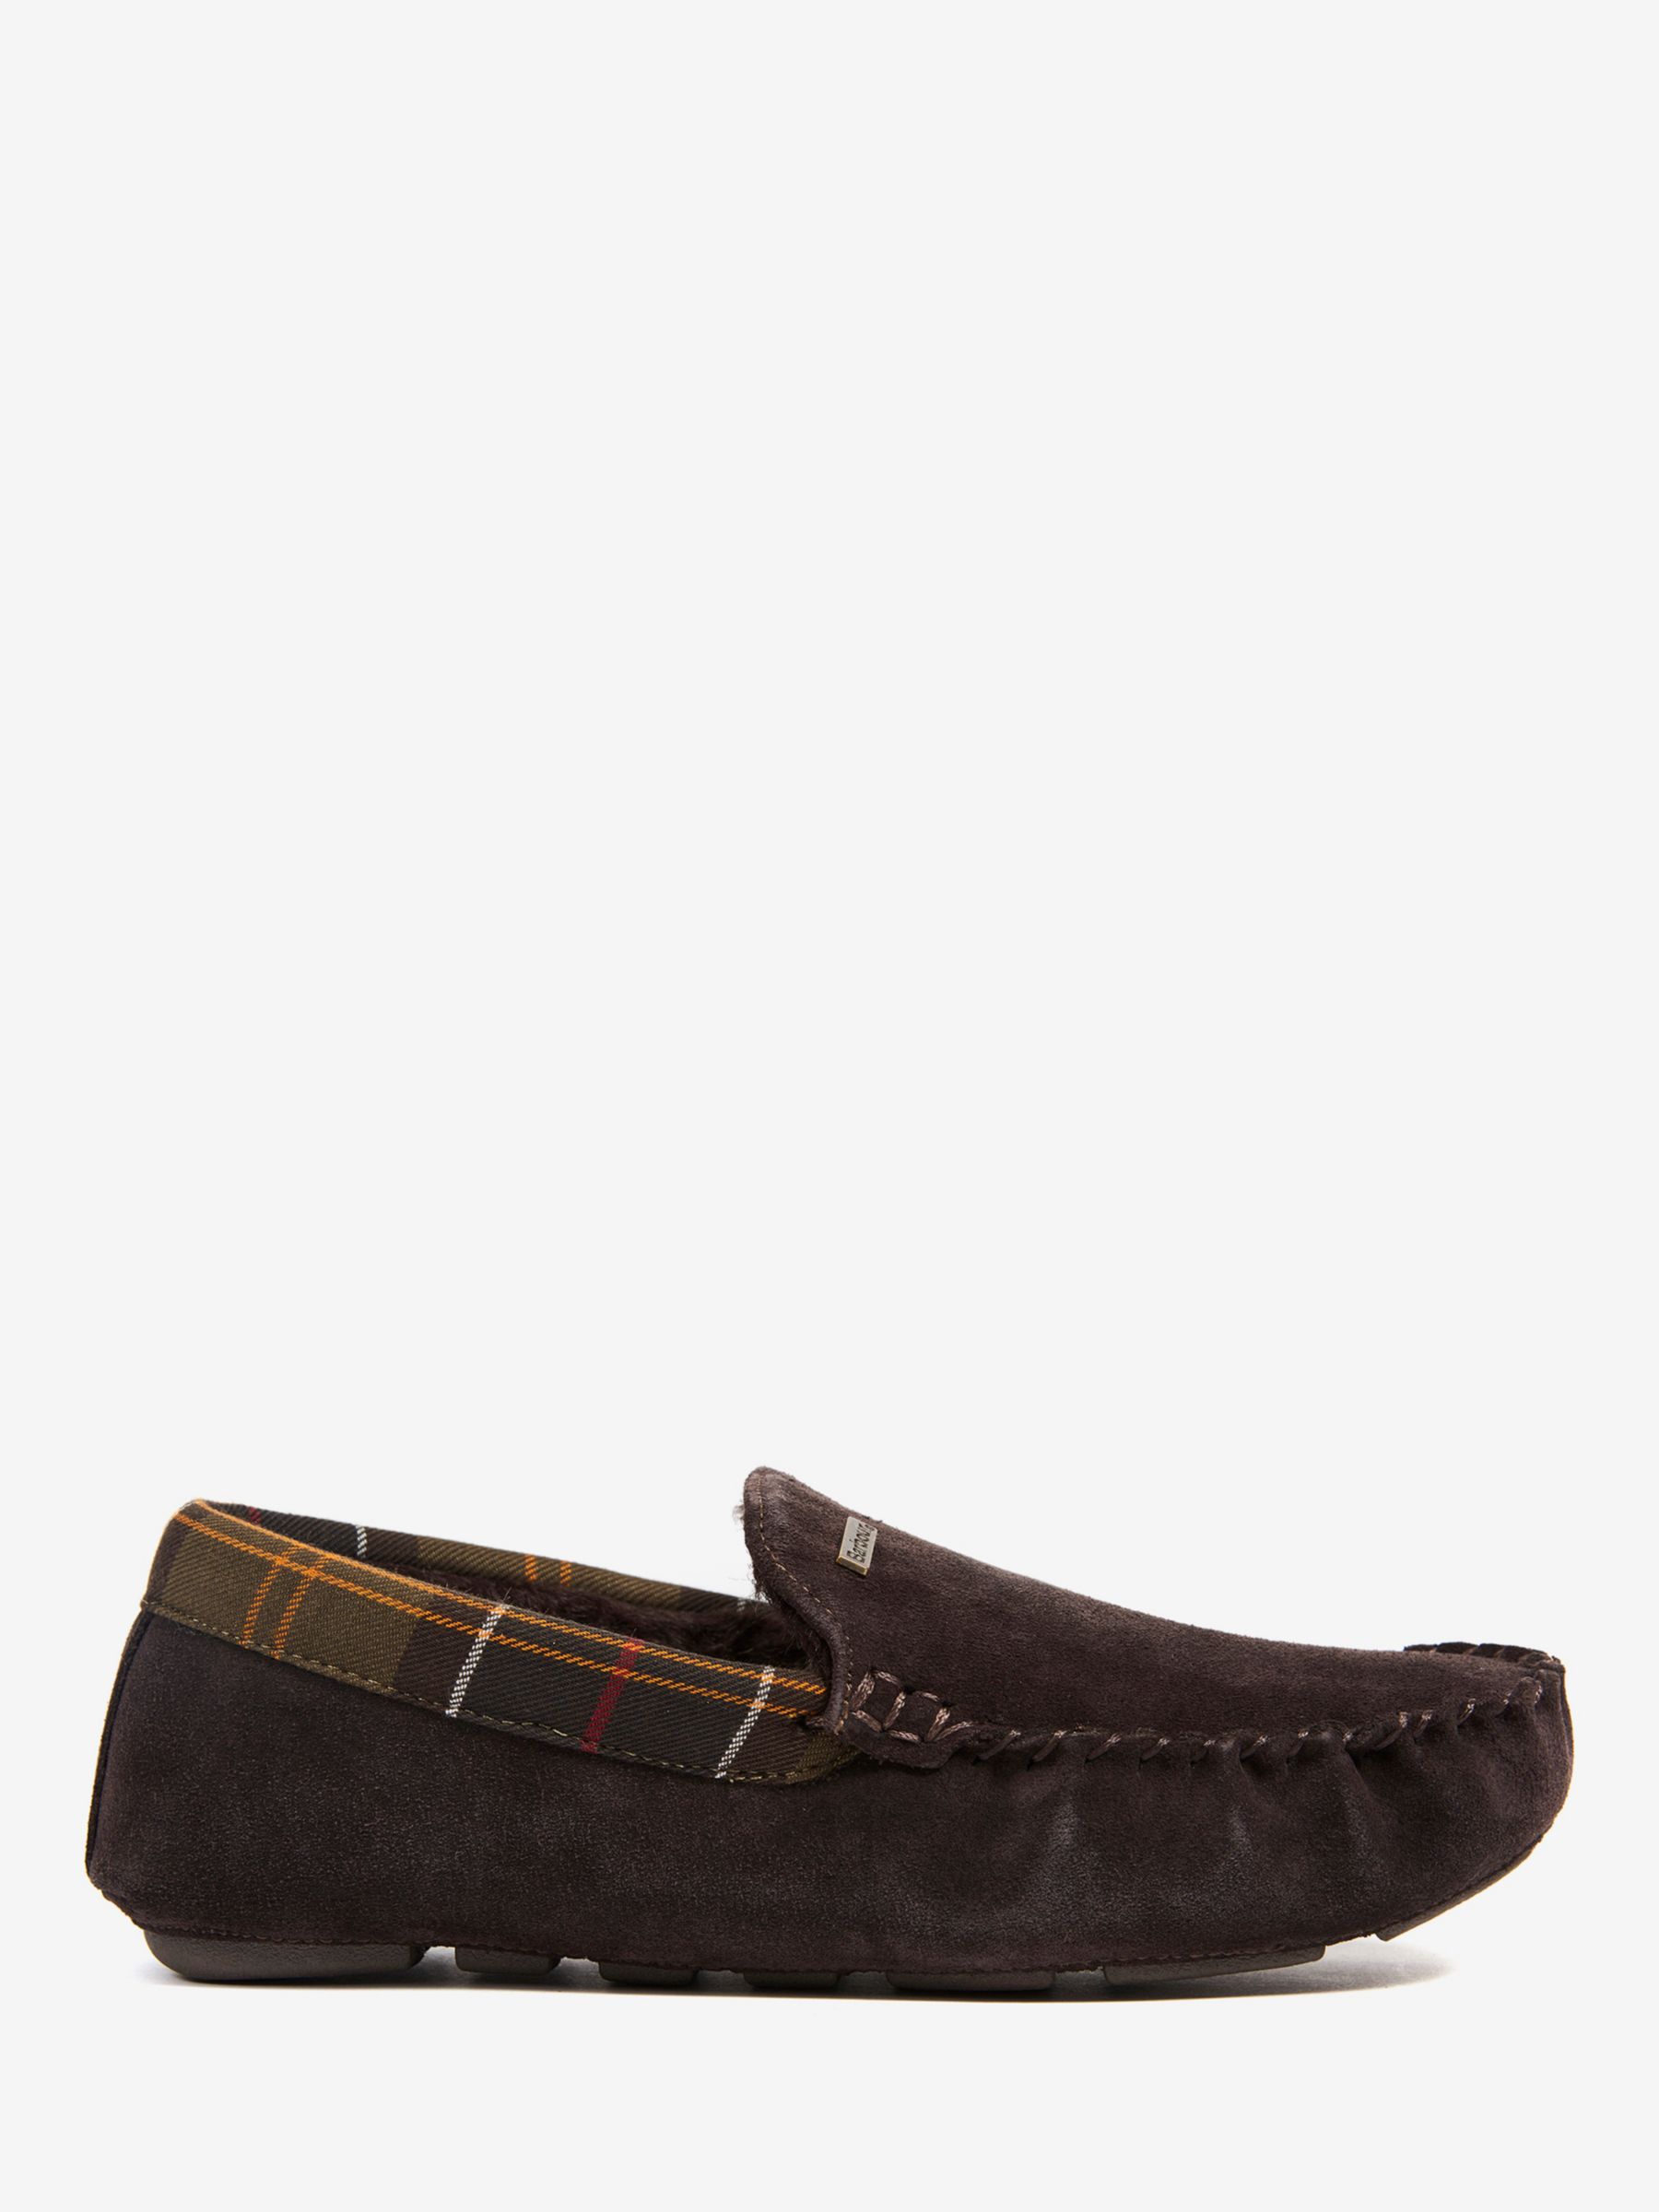 barbour monty leather slippers